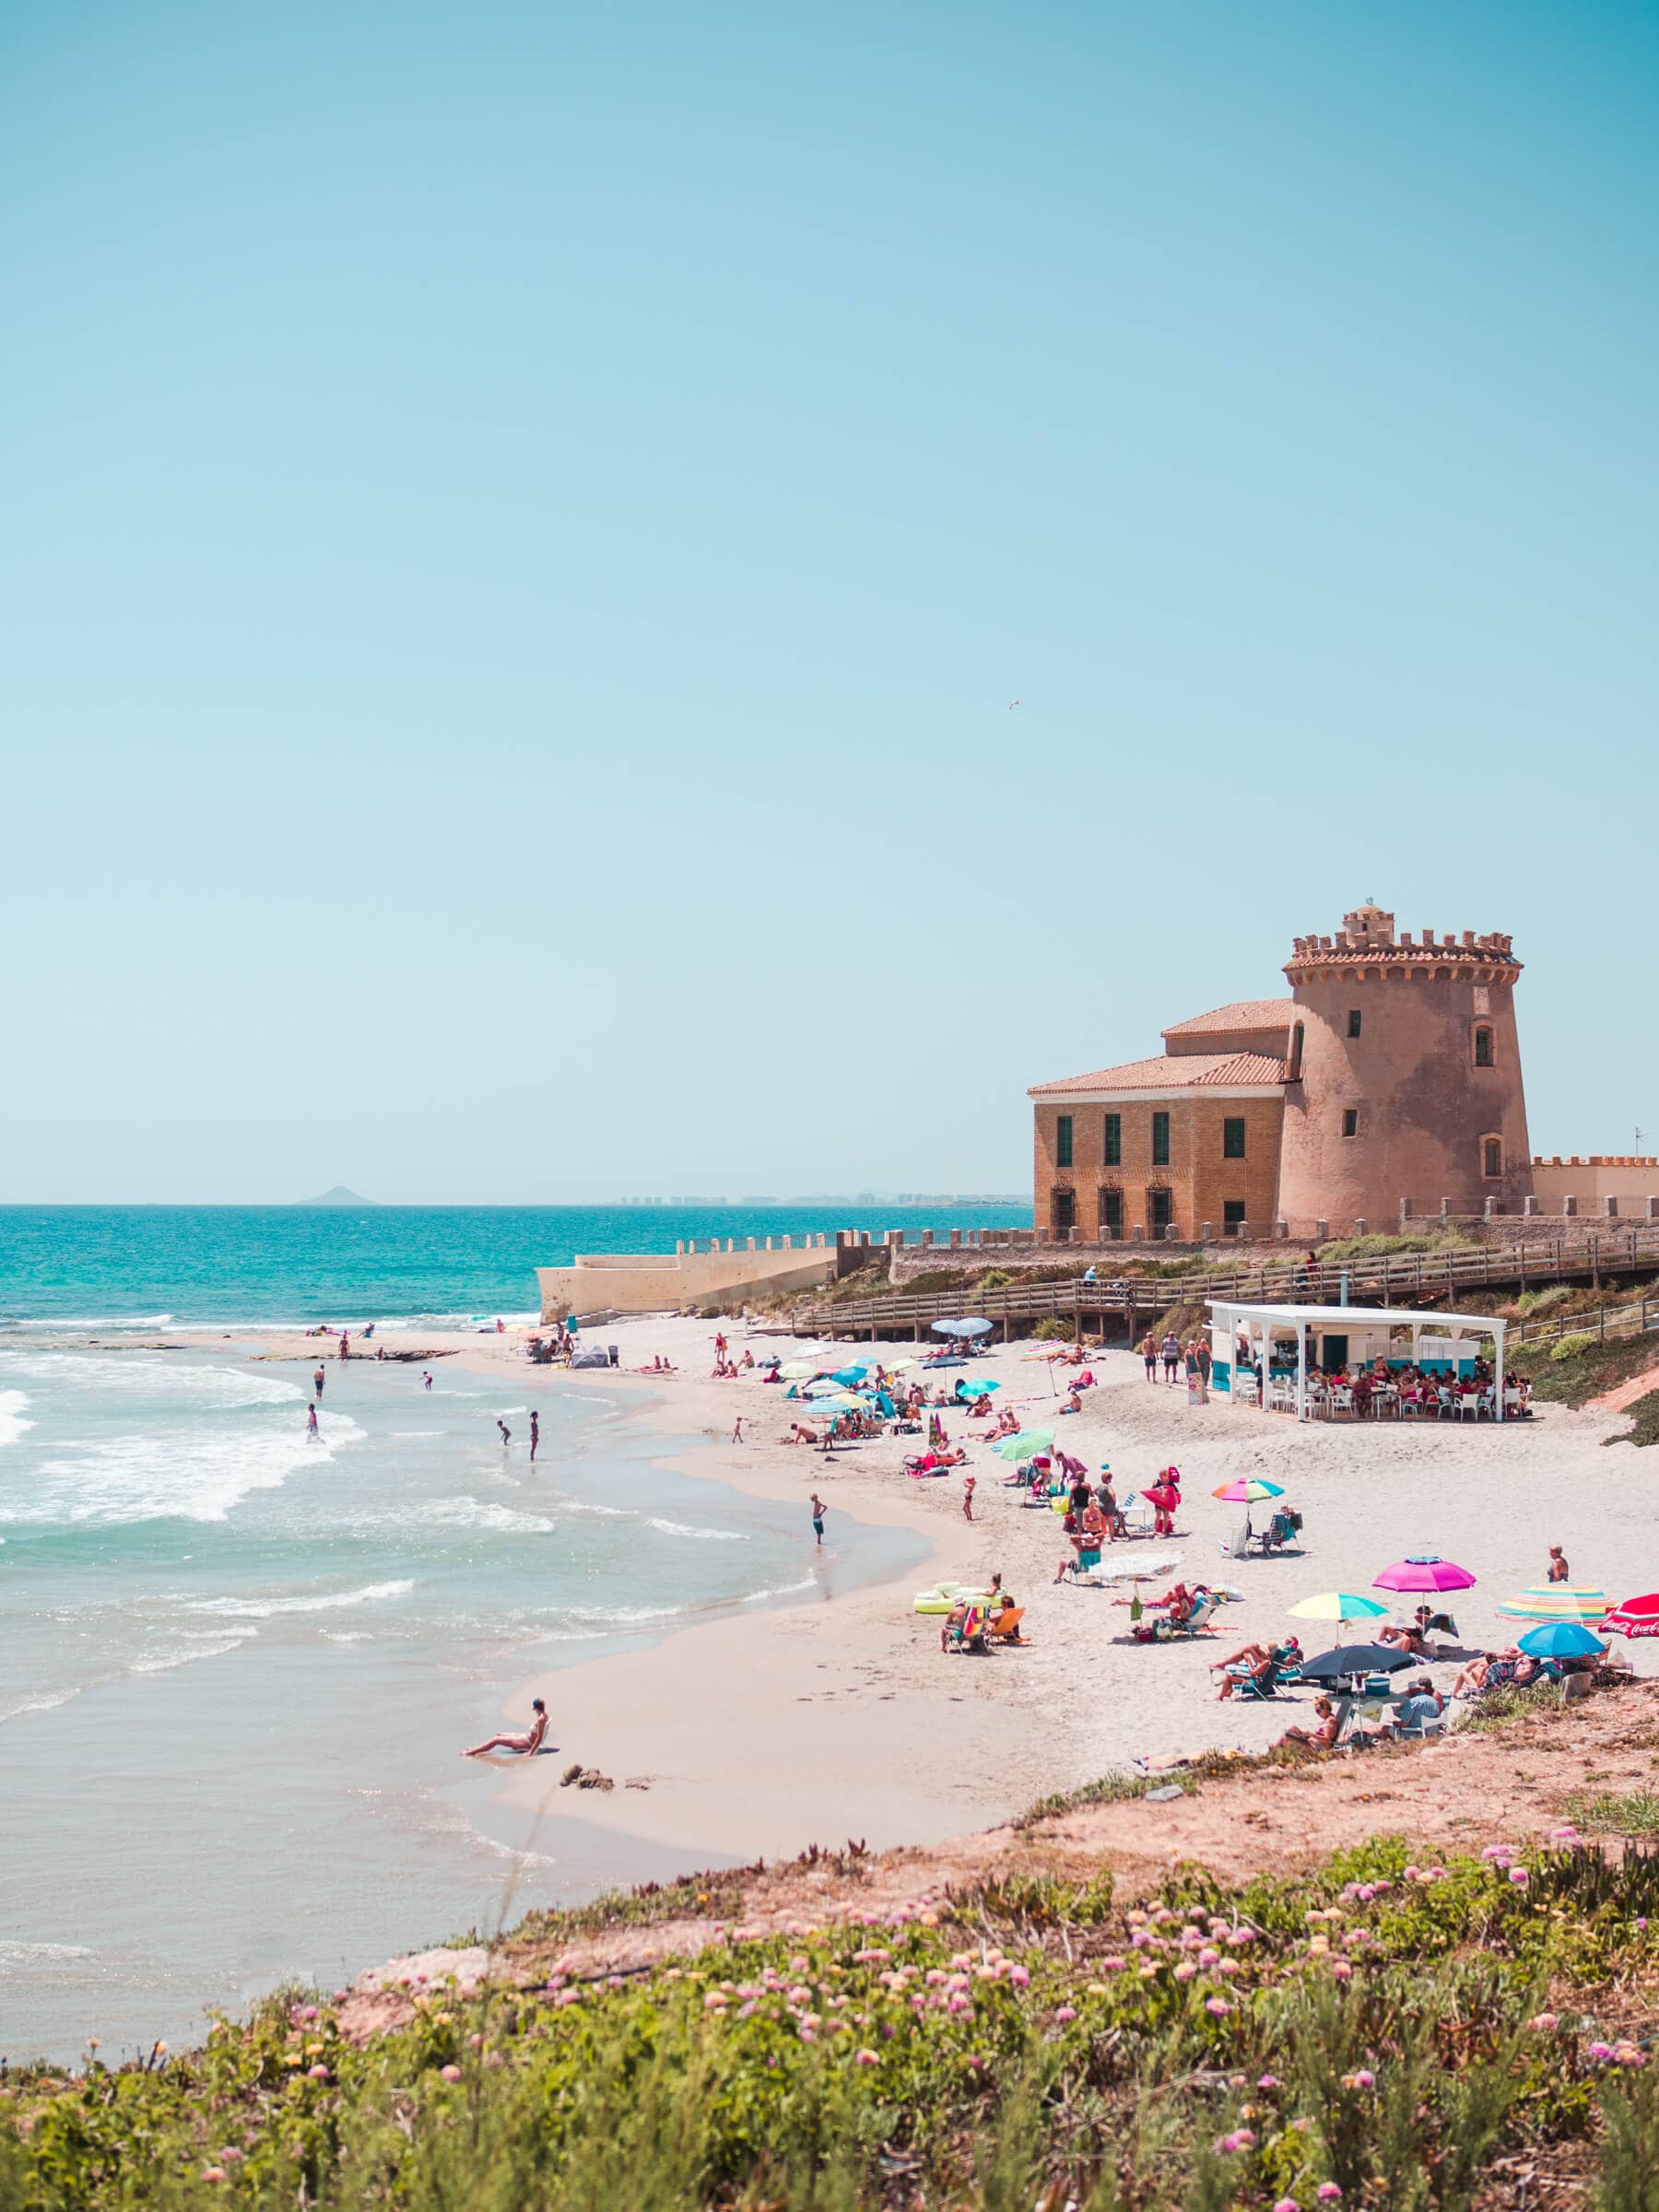 The beautiful Playa El Conde with a 16th-century watchtower in the background, one of my favorite beaches close to Hacienda Riquelme Golf Resort